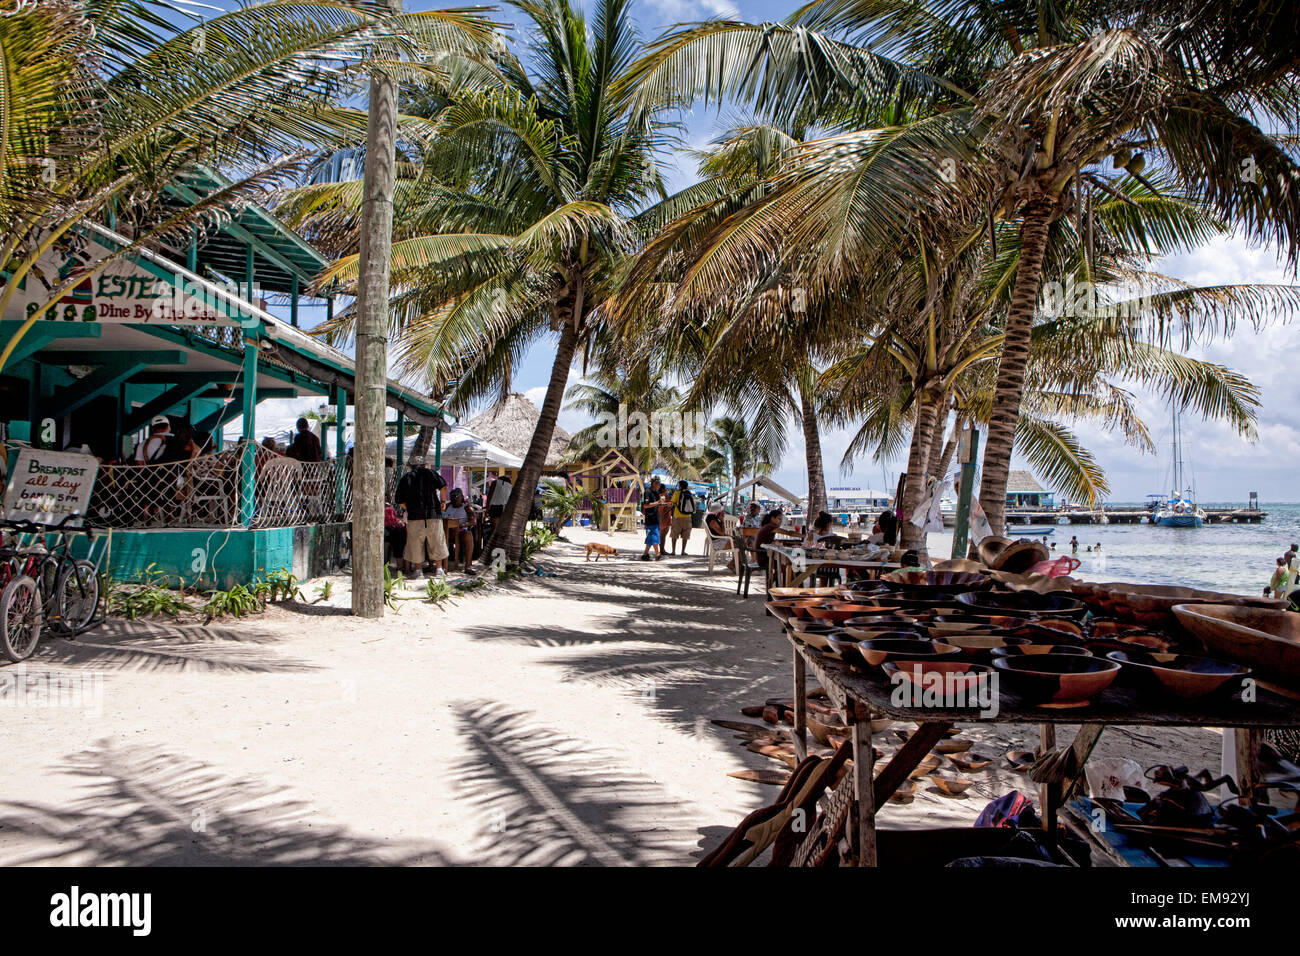 Estel's Restaurant and Bar on Ambergris Caye, Belize, South America. Stock Photo